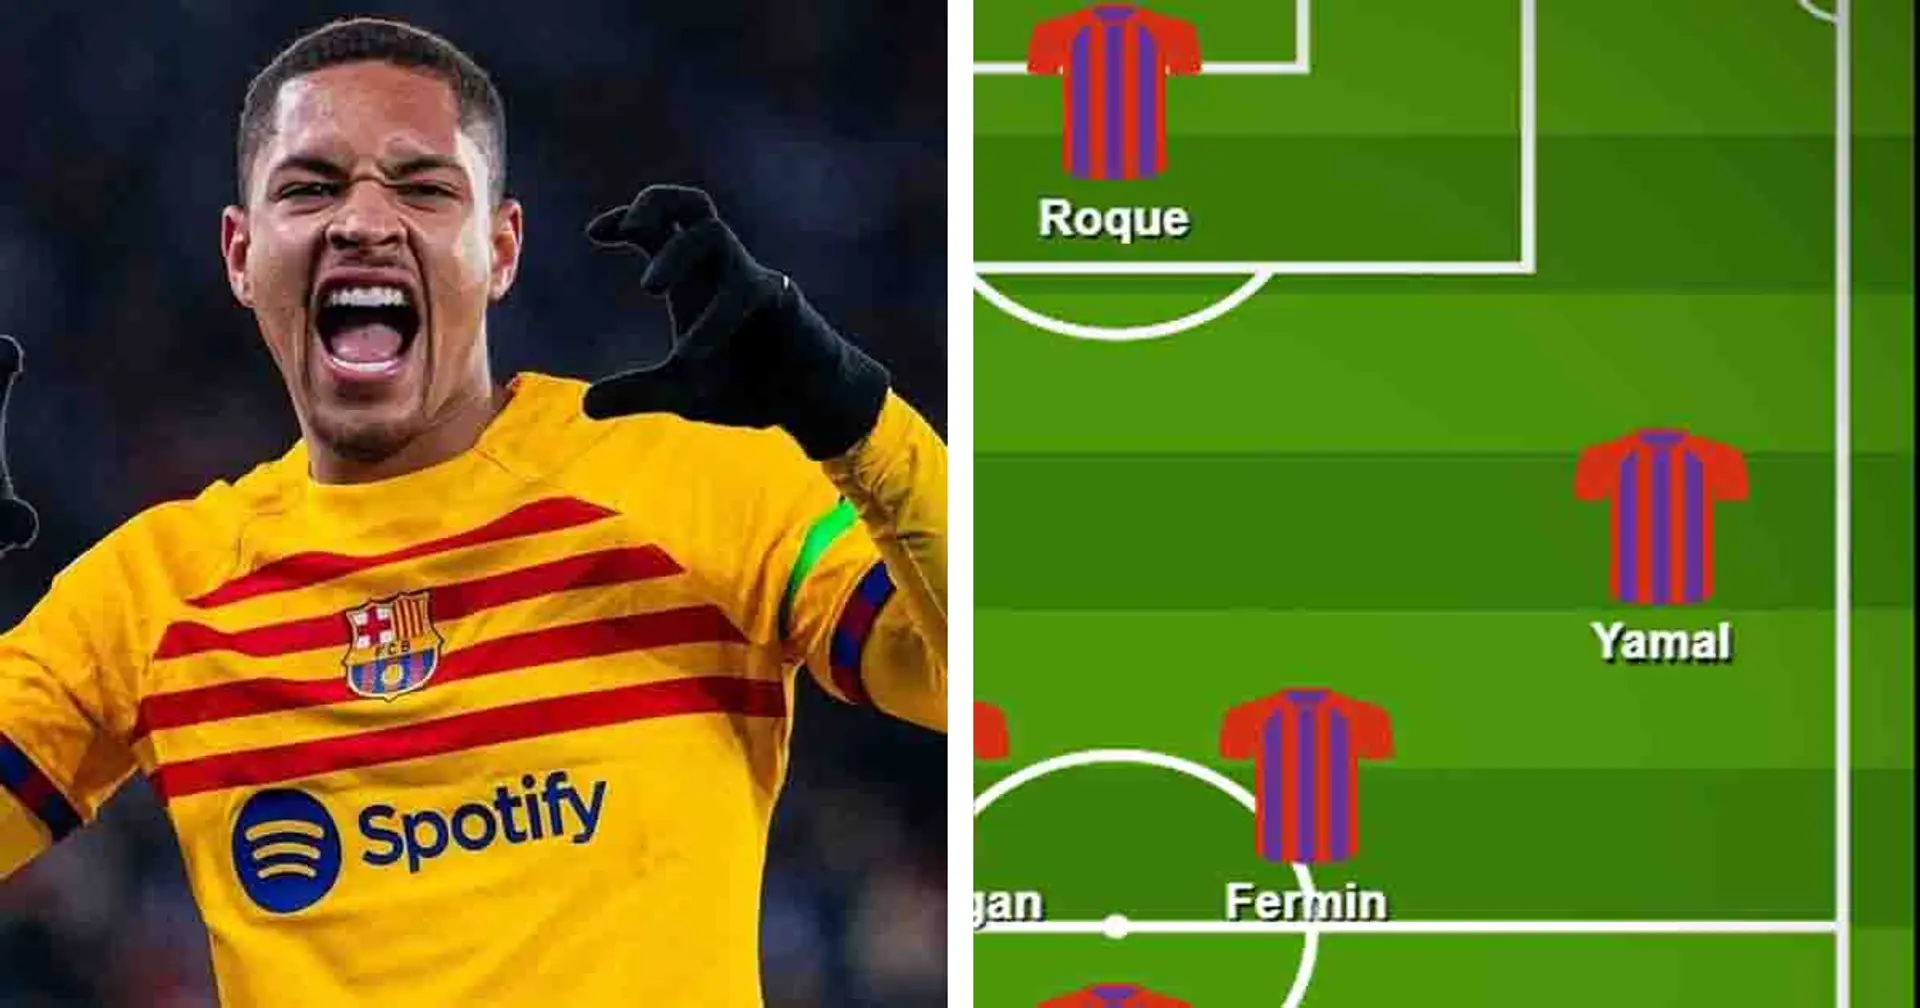 'Roque should play no less than 60 mins': Barca fans name ultimate XI for Real Sociedad clash